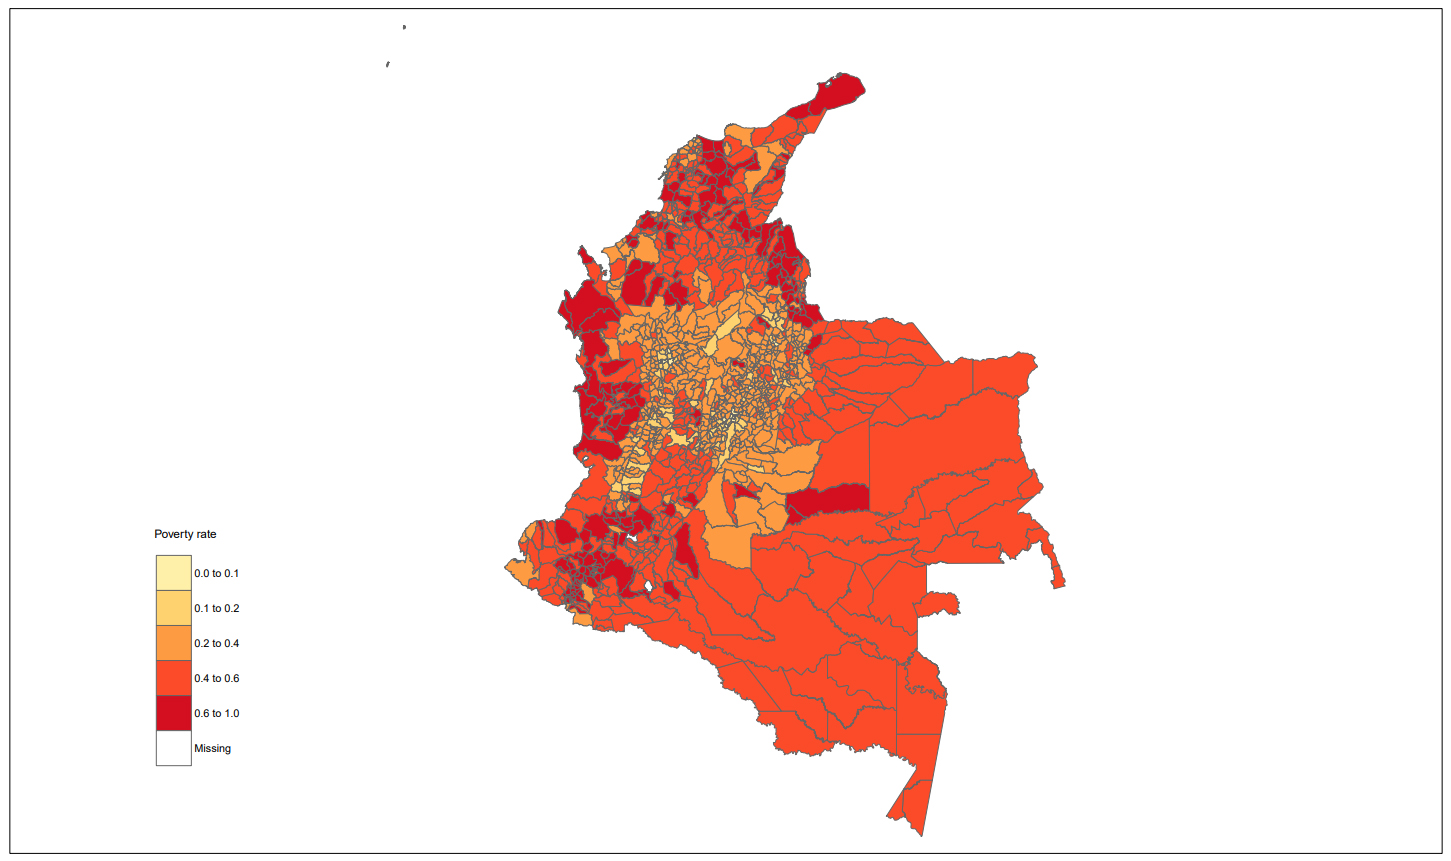 SAE estimate of the poverty incidence rate in Colombia for 2018 based on the EBP with sample weights approach. Source: Prepared by the authors.